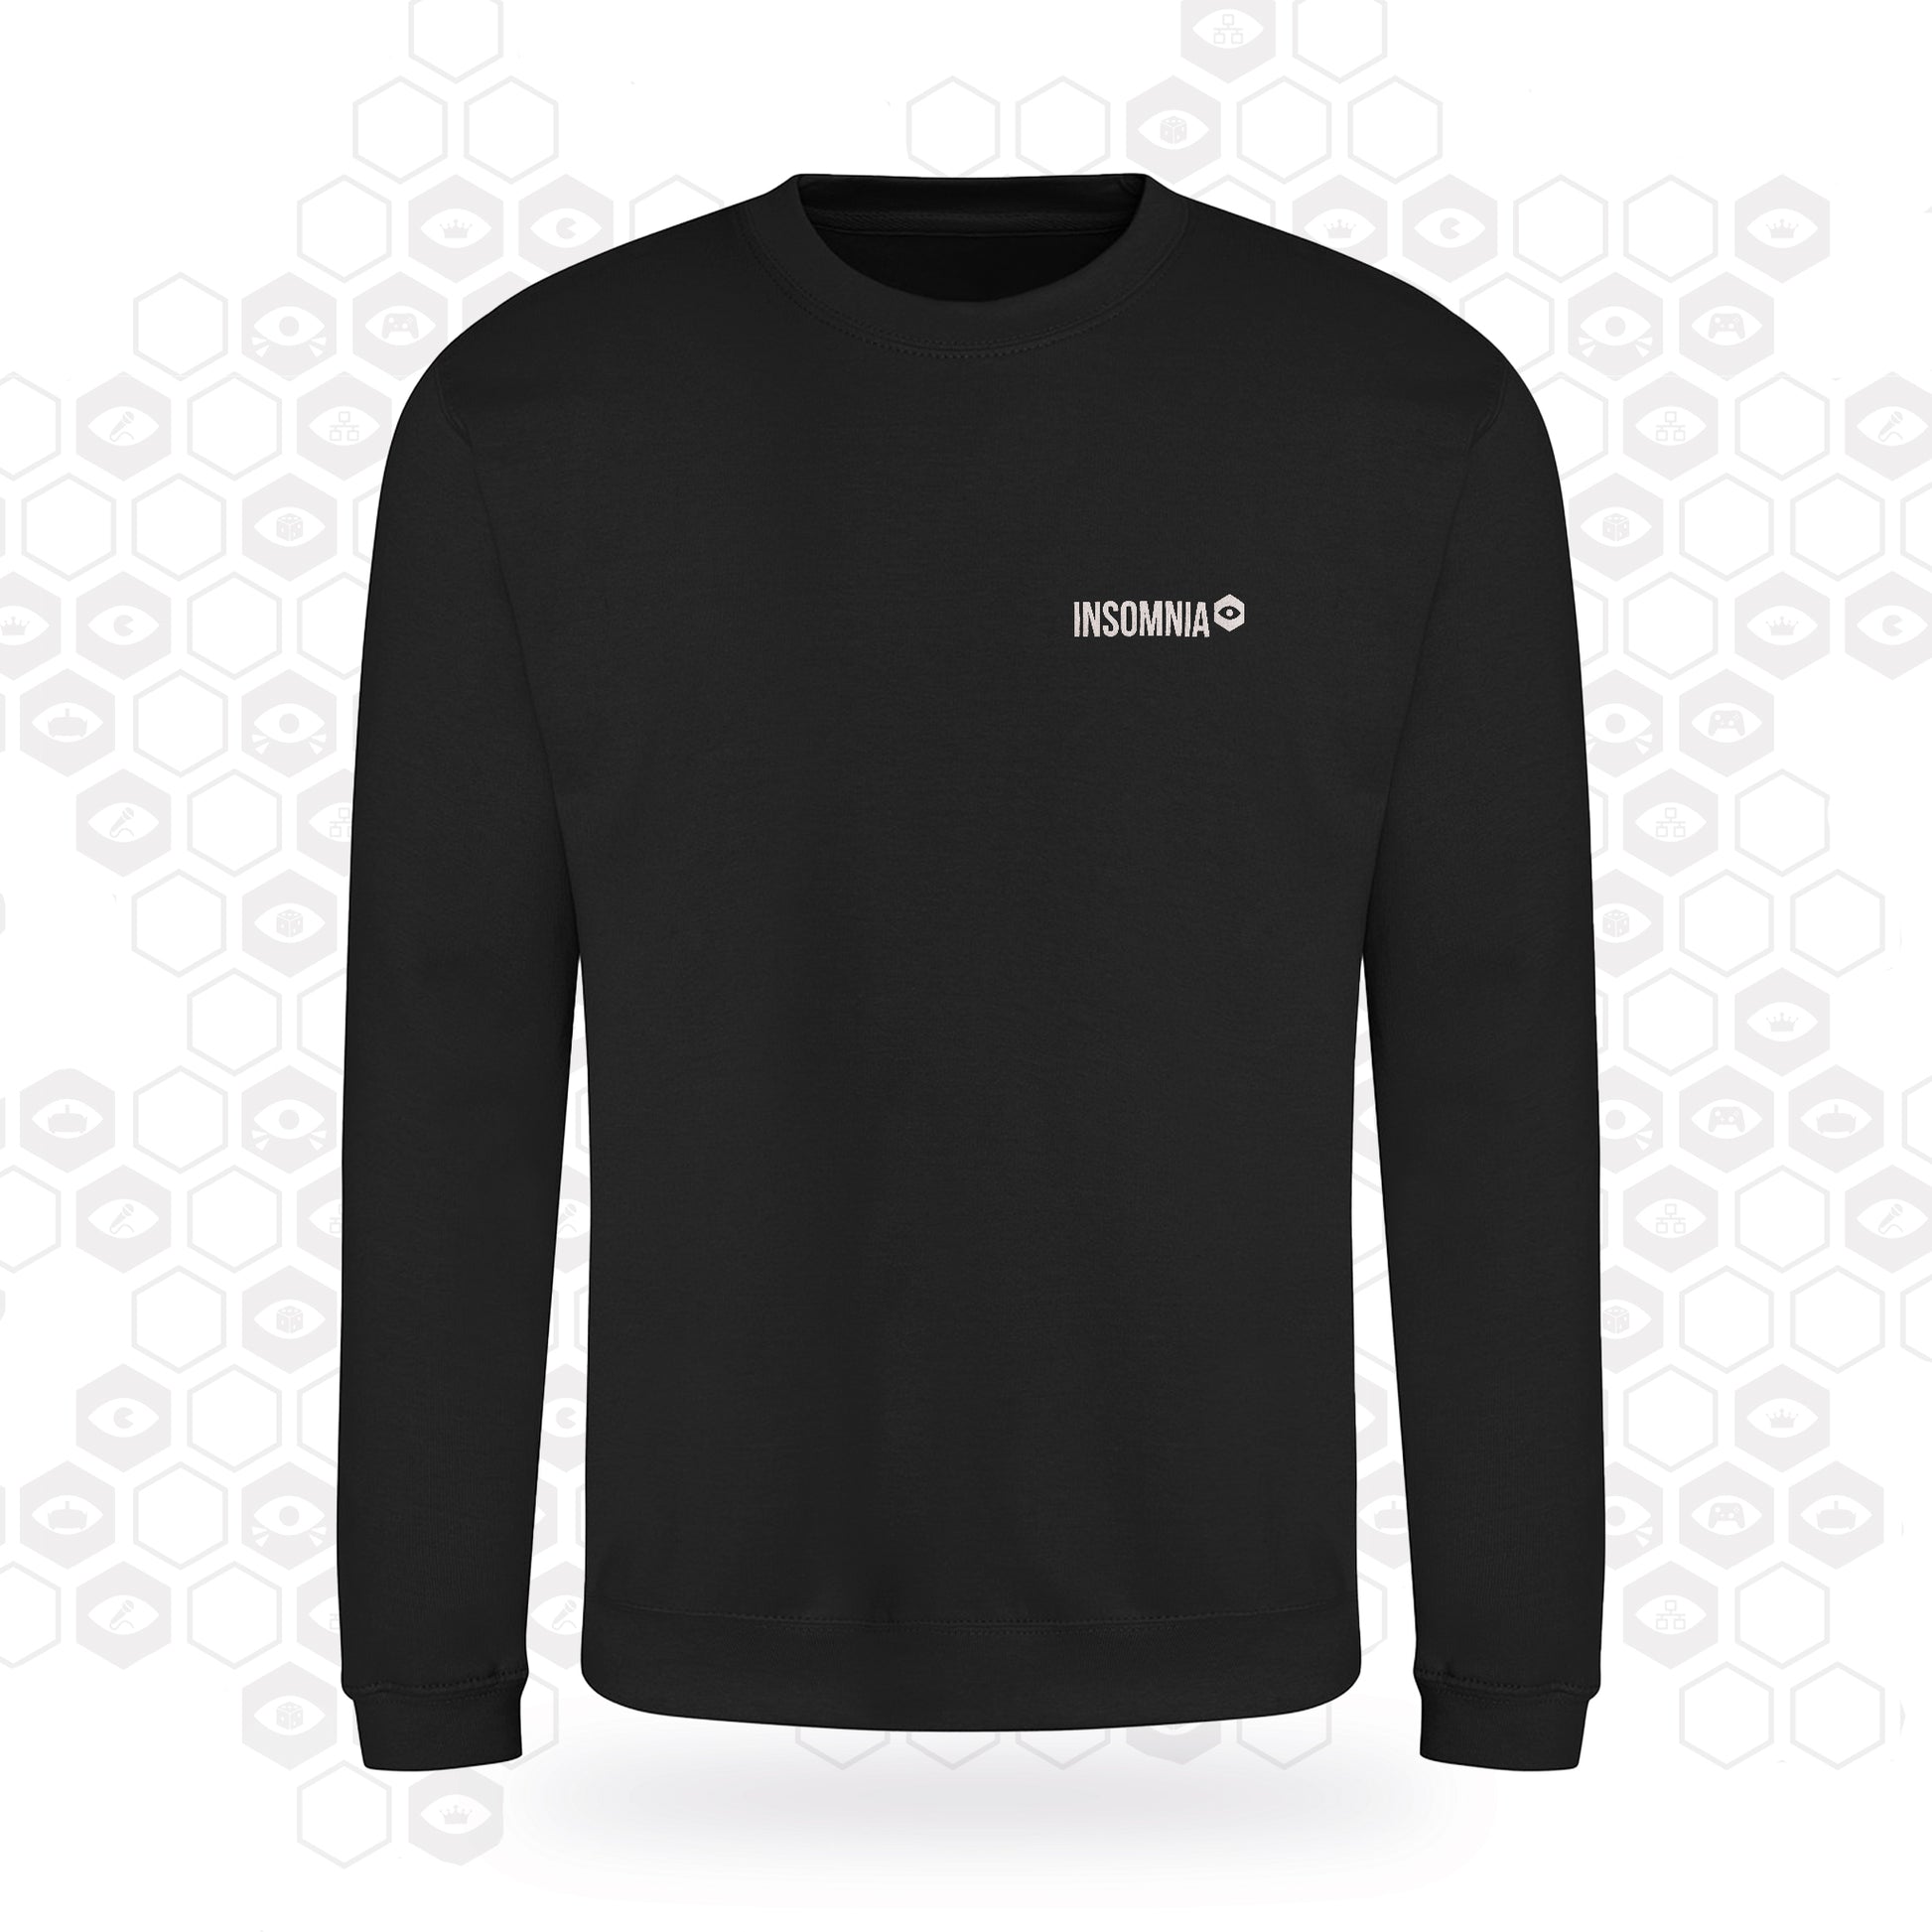 black sweat shirt with insomnia logo printed on the left chest